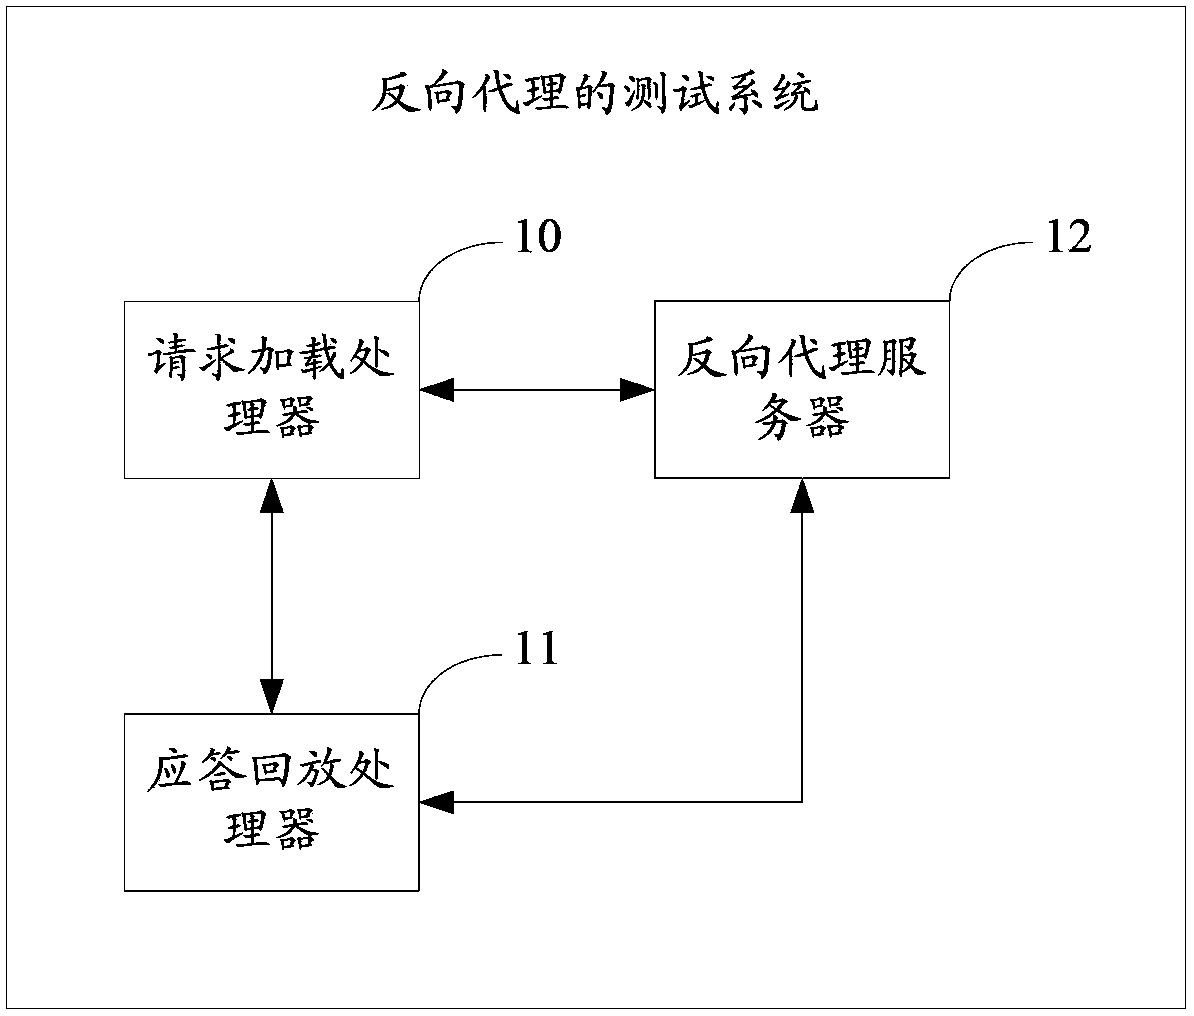 Reverse agent test system and method